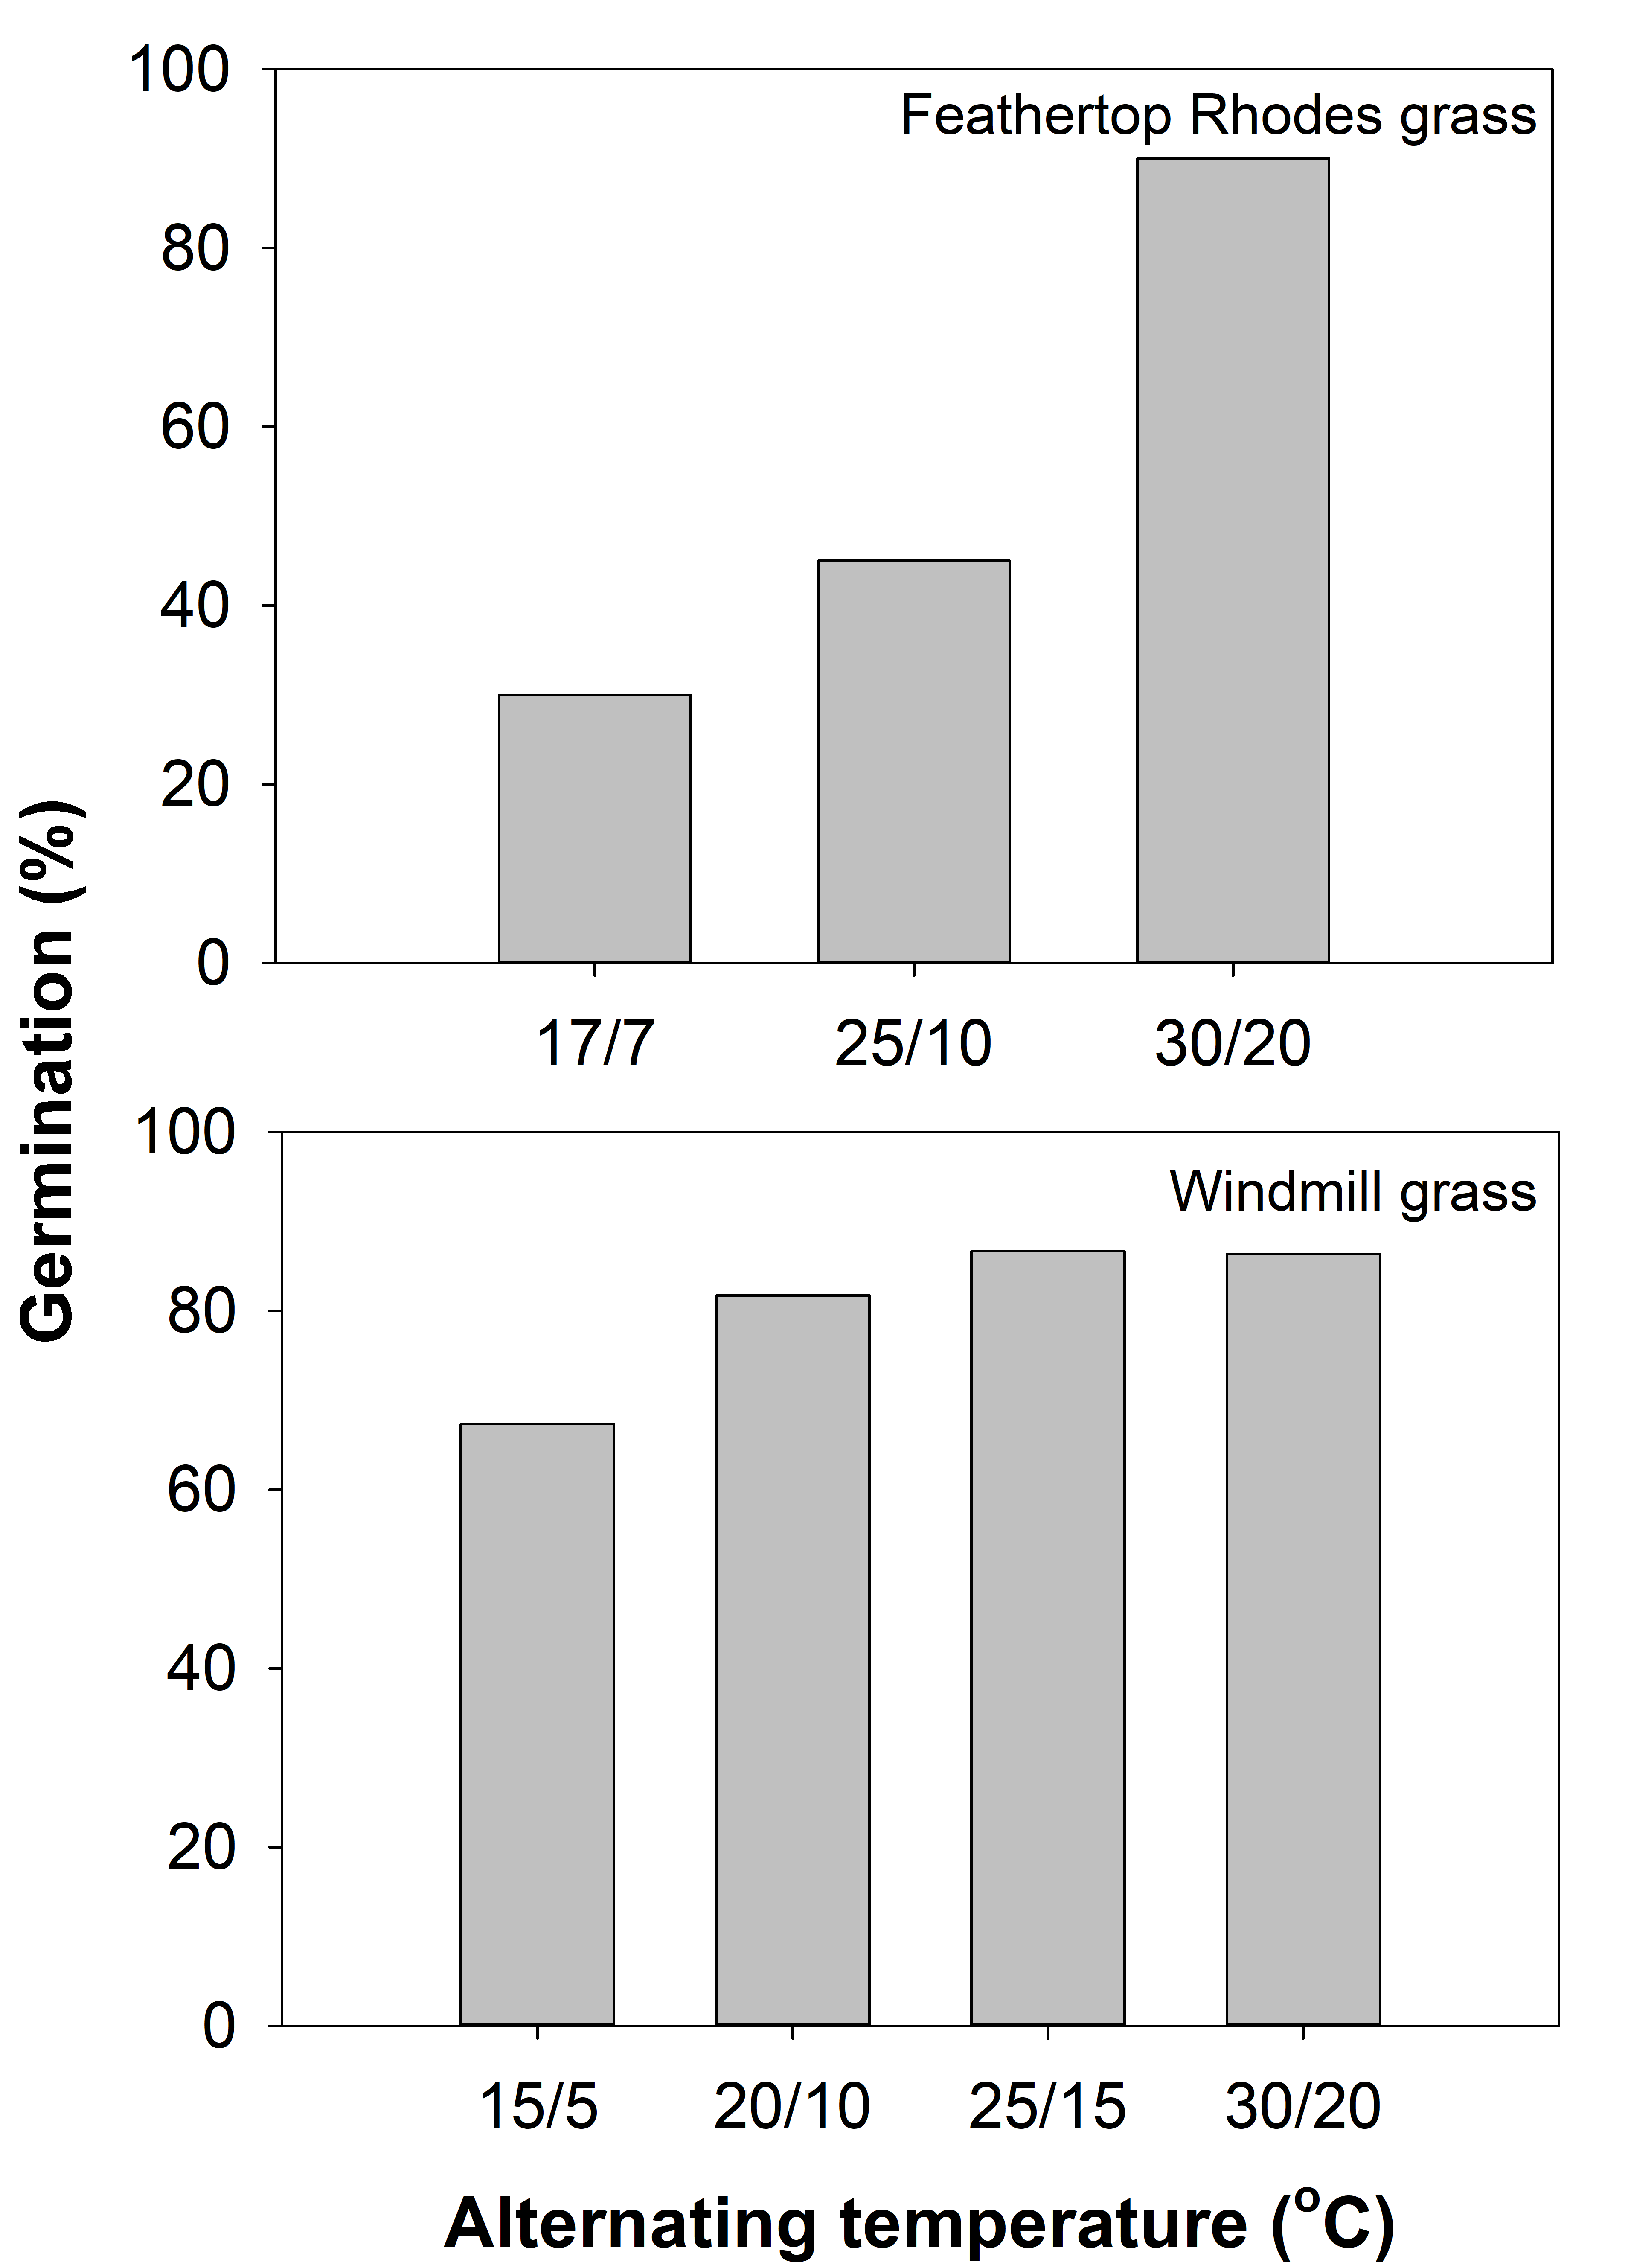 These two column graphs show the effect of alternating day/night (12 hour/12 hour) temperatures (°C) on seed germination of feathertop Rhodes grass (Fernando et al. 2016) and windmill grass (Chauhan et al. 2018)